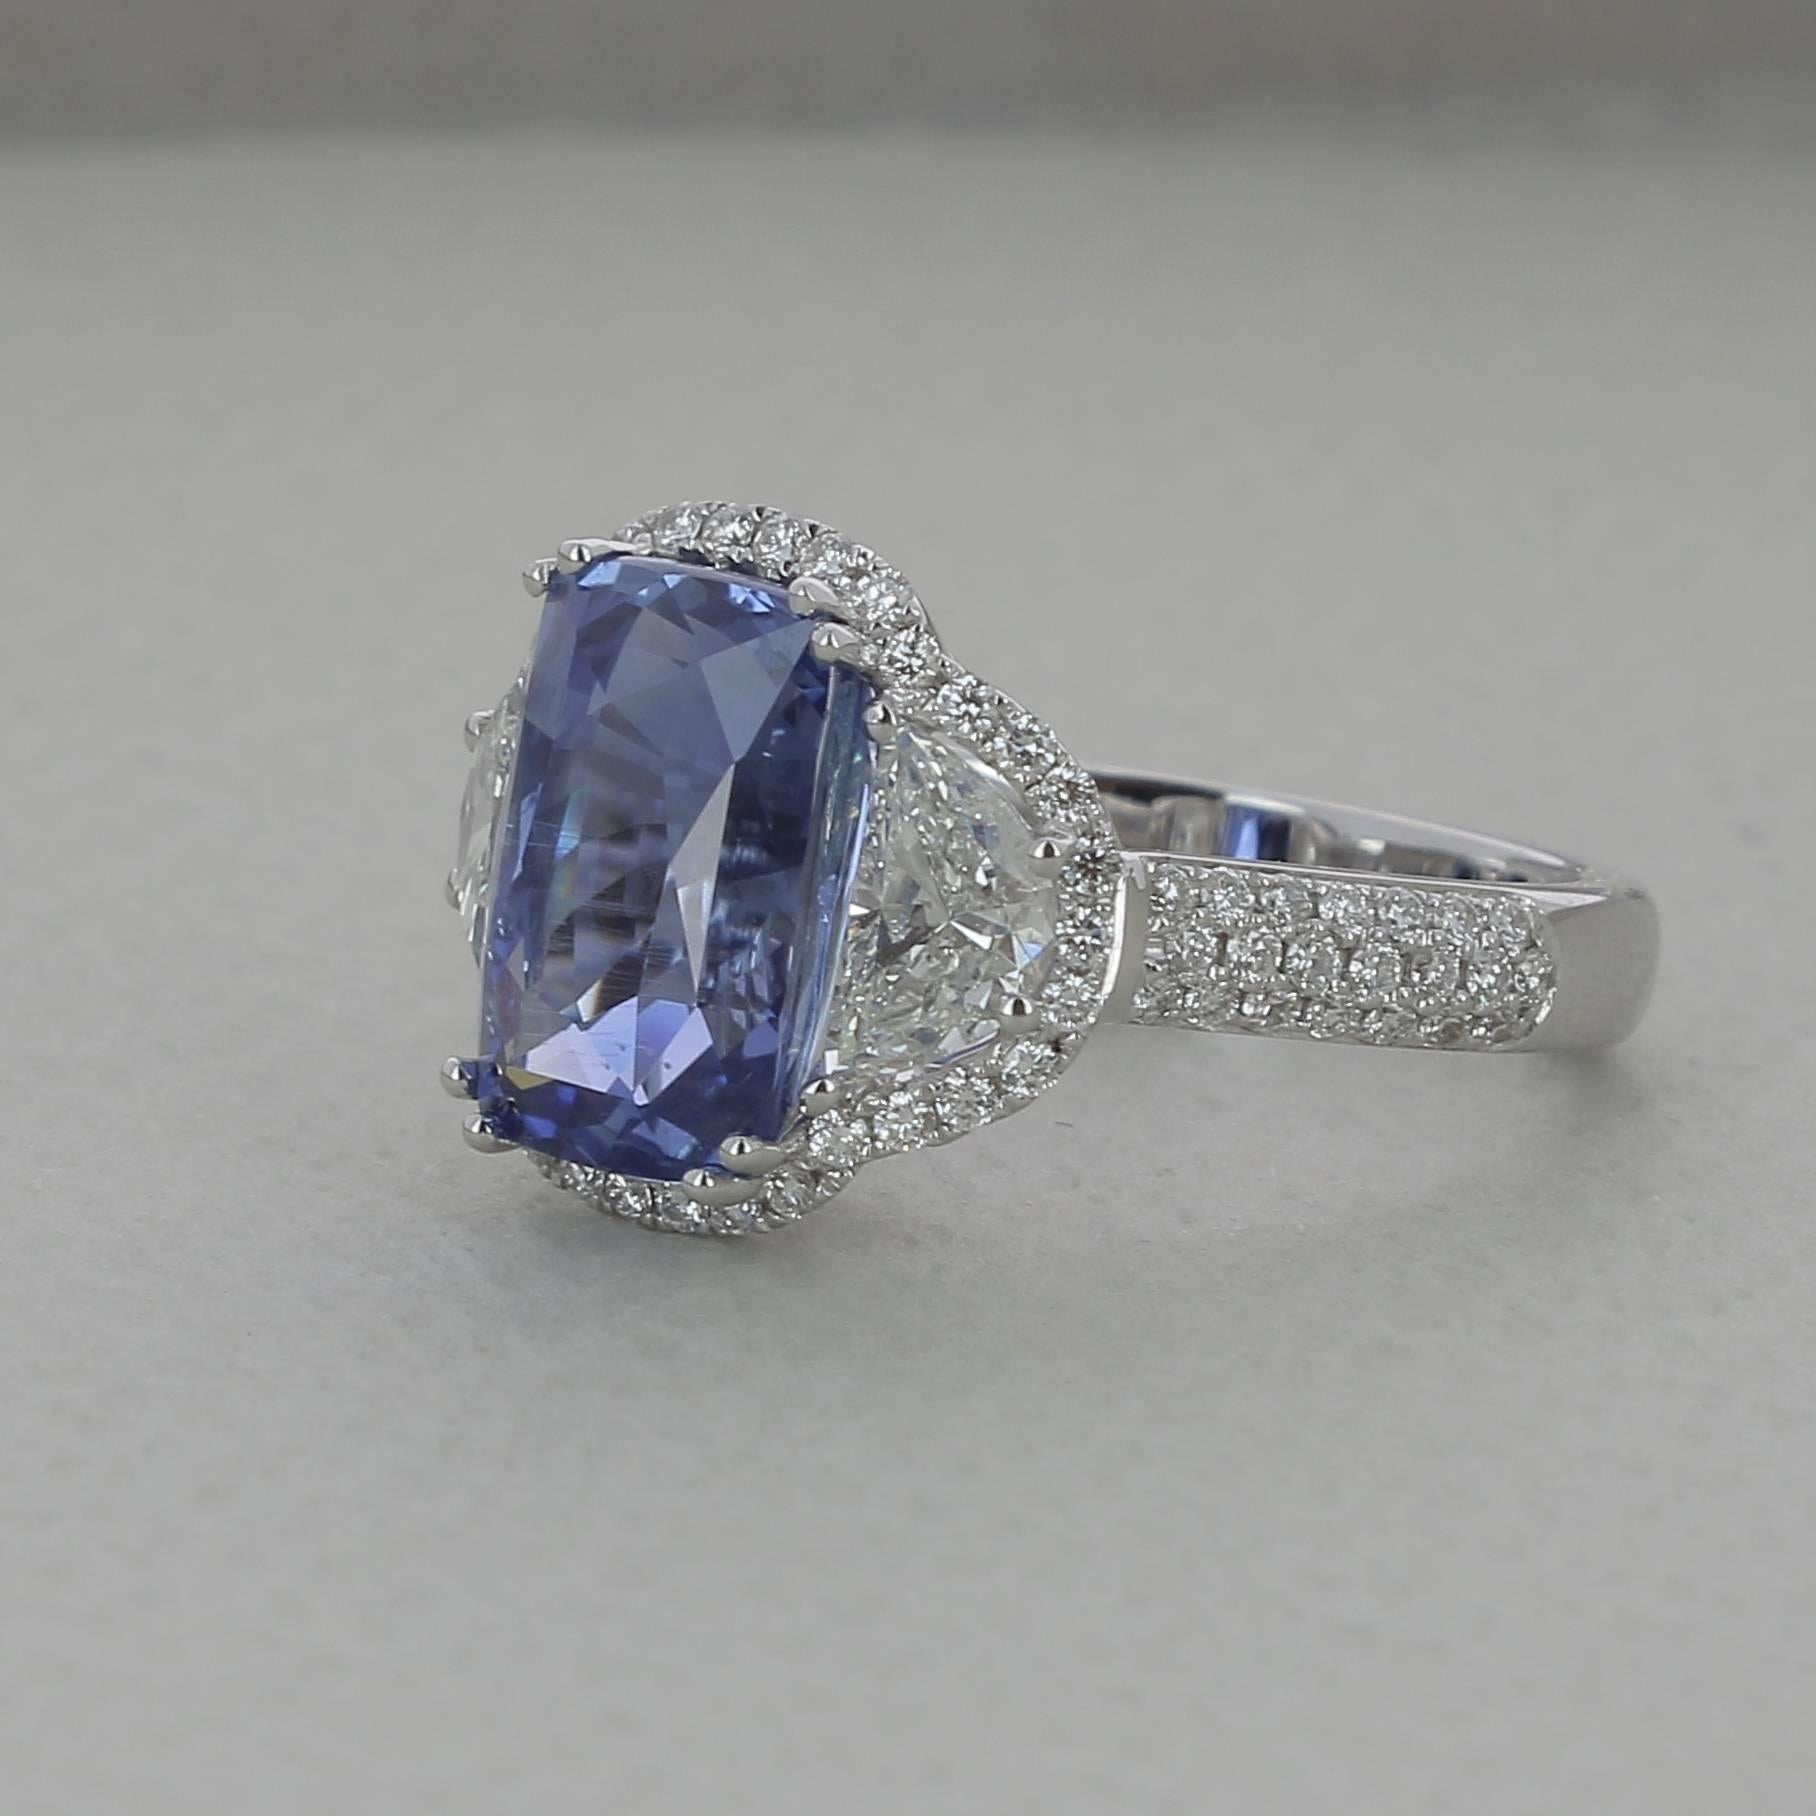 An amazing Ceylon Sapphire Ring, flanked on each side by a half moon Diamond.
The total weight of the Ceylon  Sapphire ( or Sri Lanka Sapphire ) is 6.77 Carat.
The Half Moon Diamond weight is 1.07 Carat ( 2 half moon Diamonds ).
All this beautiful